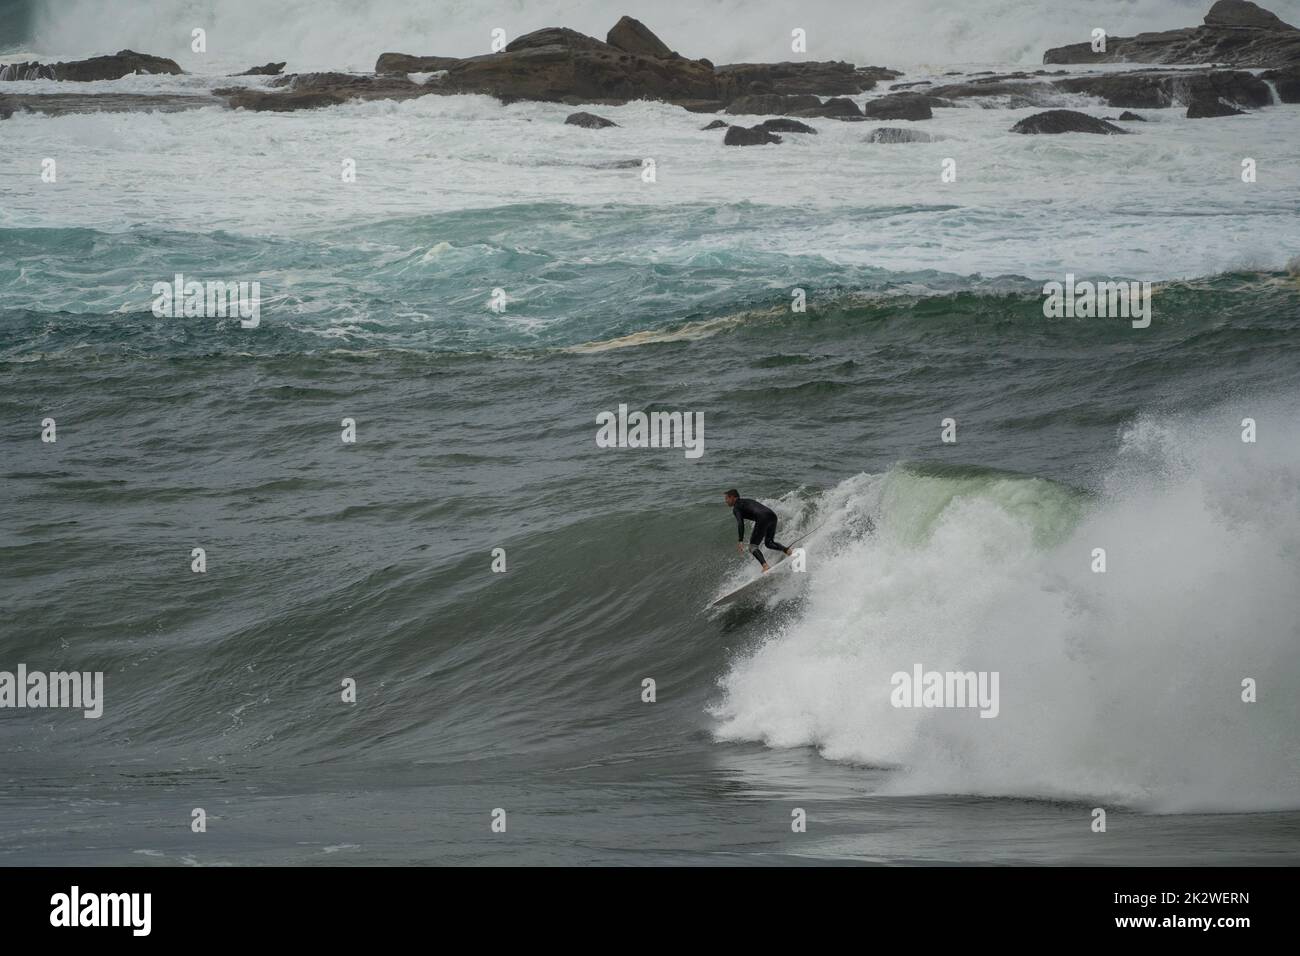 A closeup shot of a surfer surfing on a large wave at Wedding Cake Island, Sydney Stock Photo